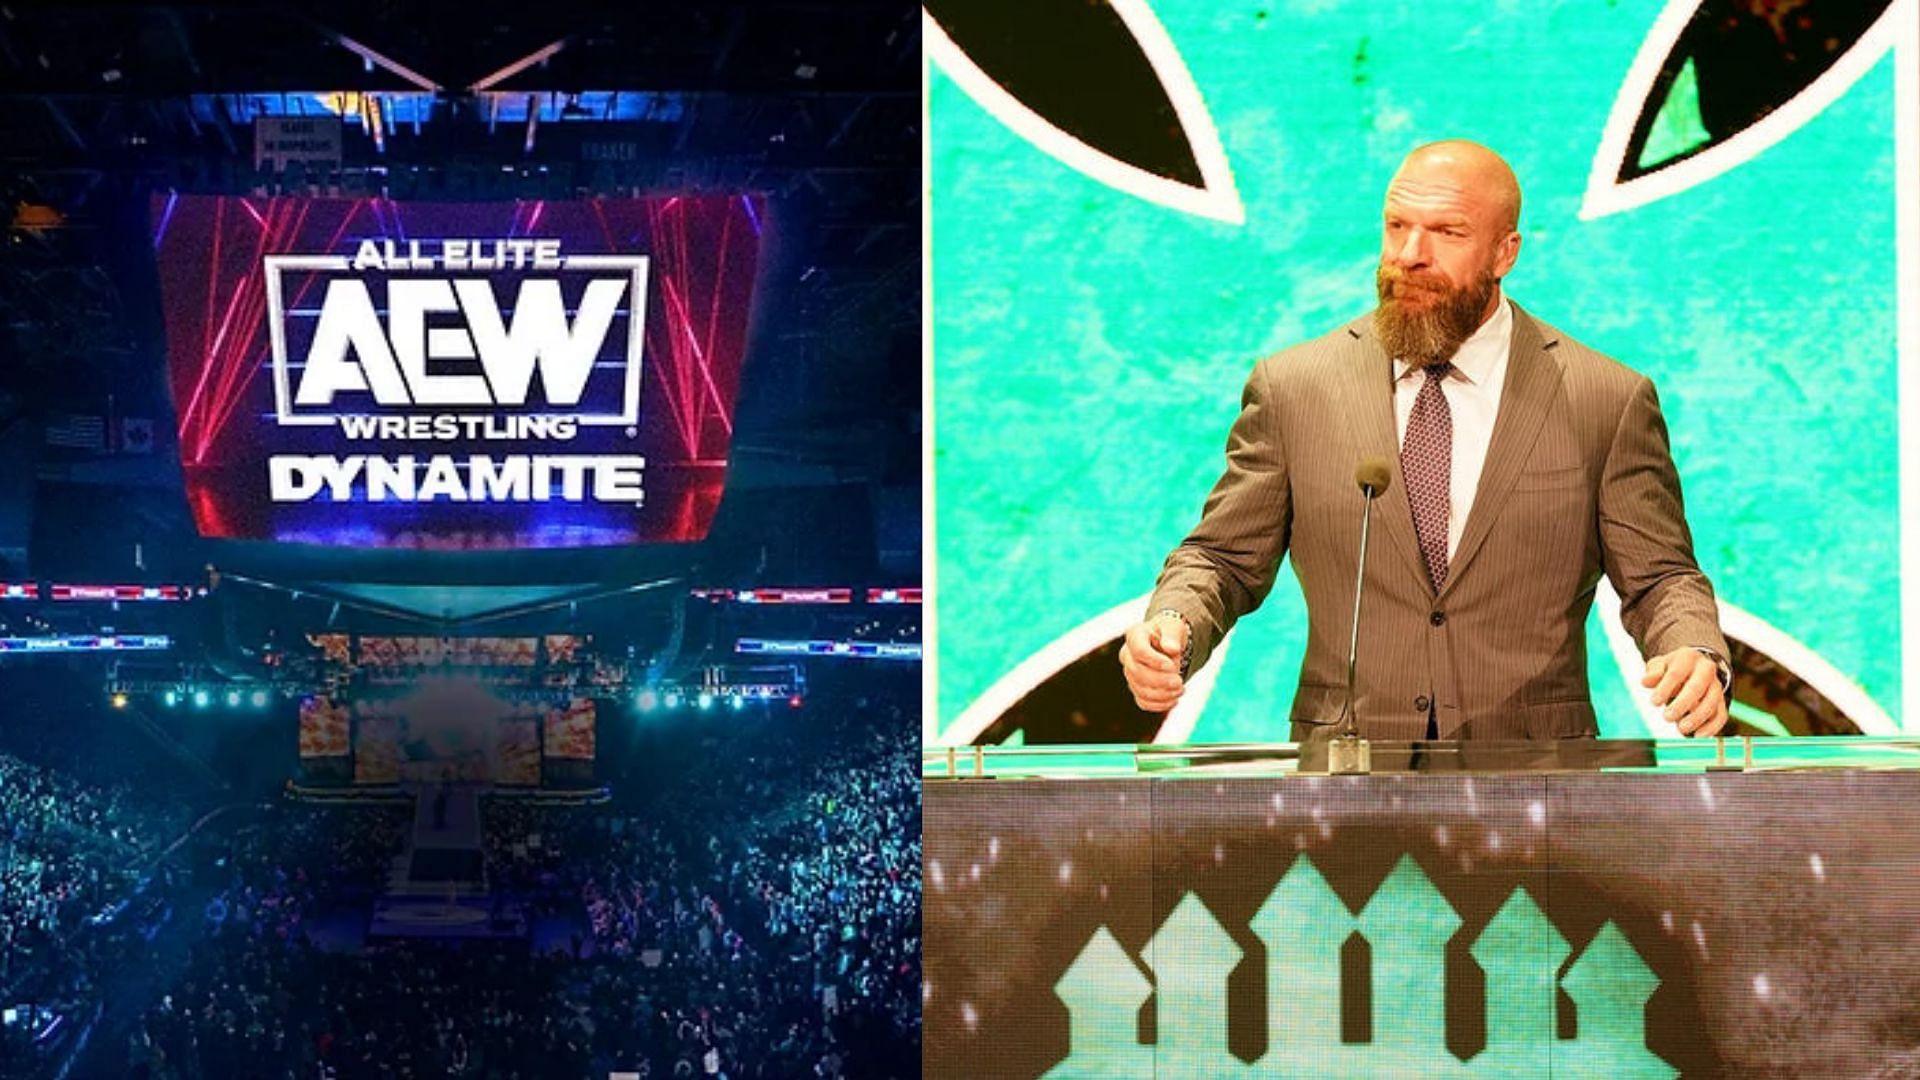 Triple H is the head of WWE creative at this time